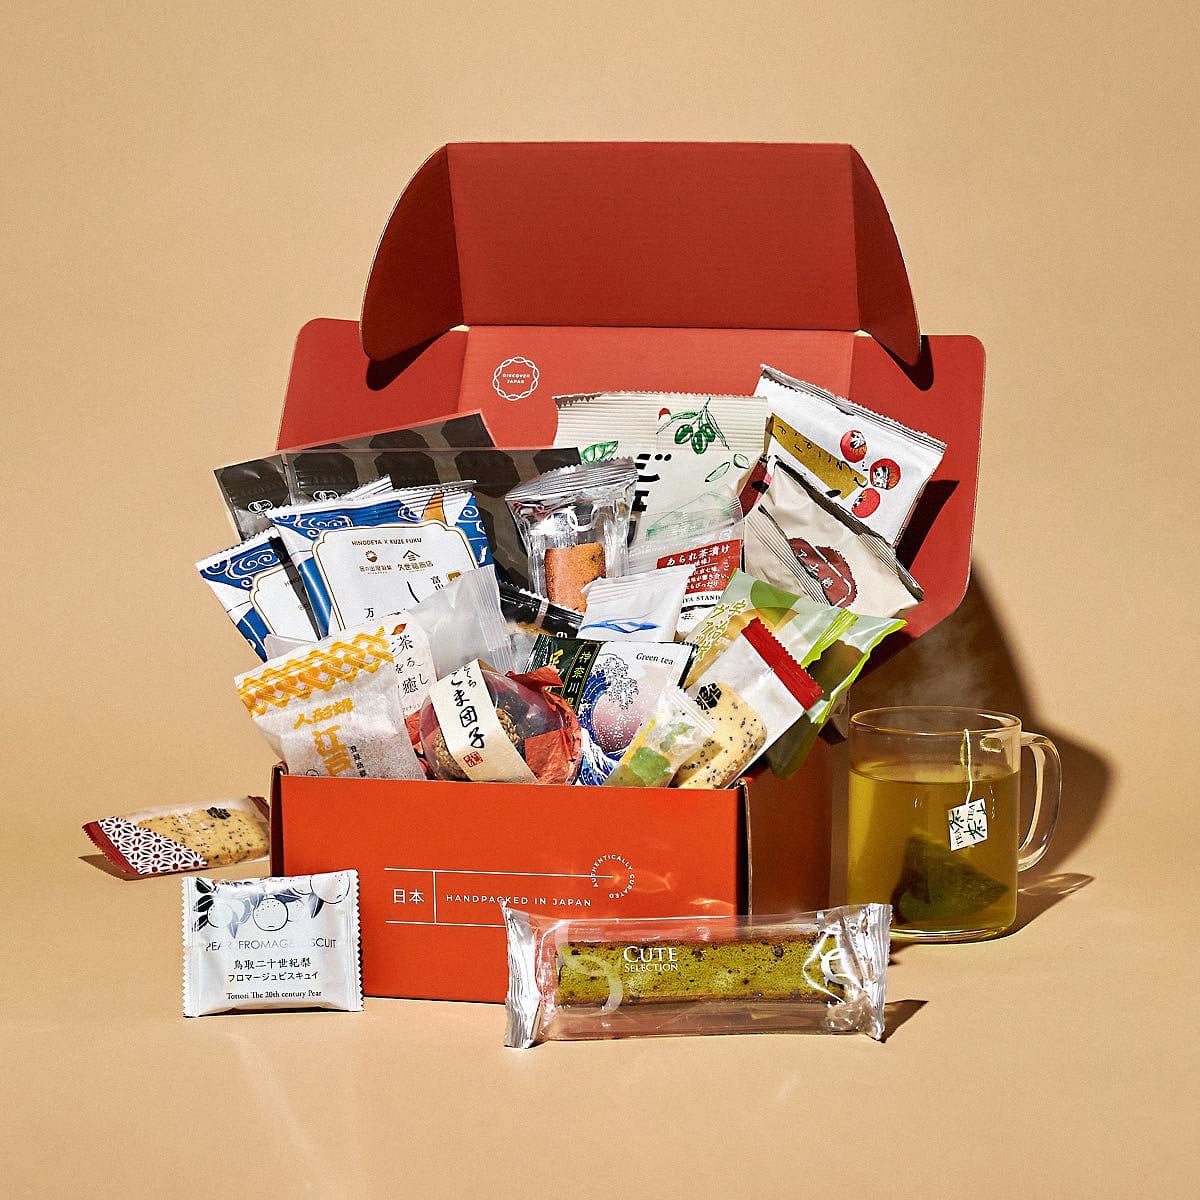 Snack Box Gift Subscription